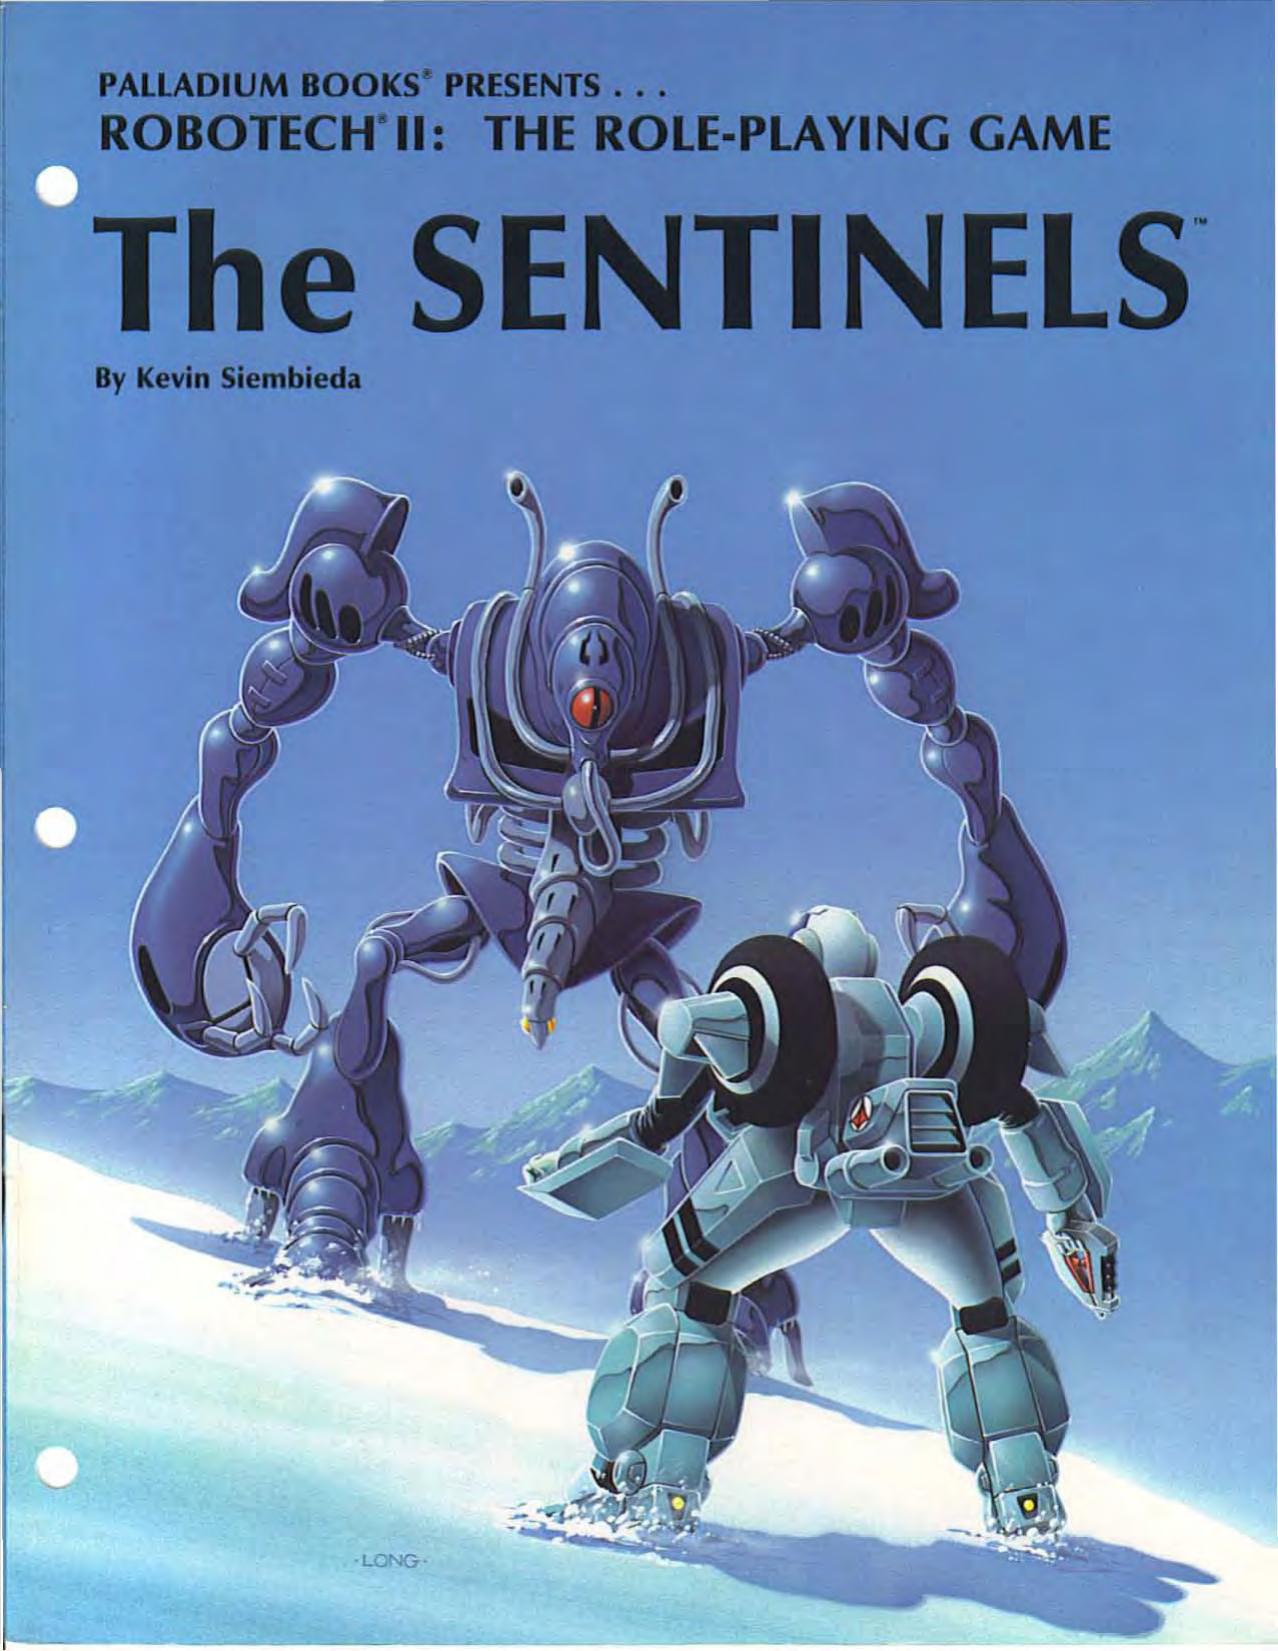 Robotech II - The Sentinels by PAL557